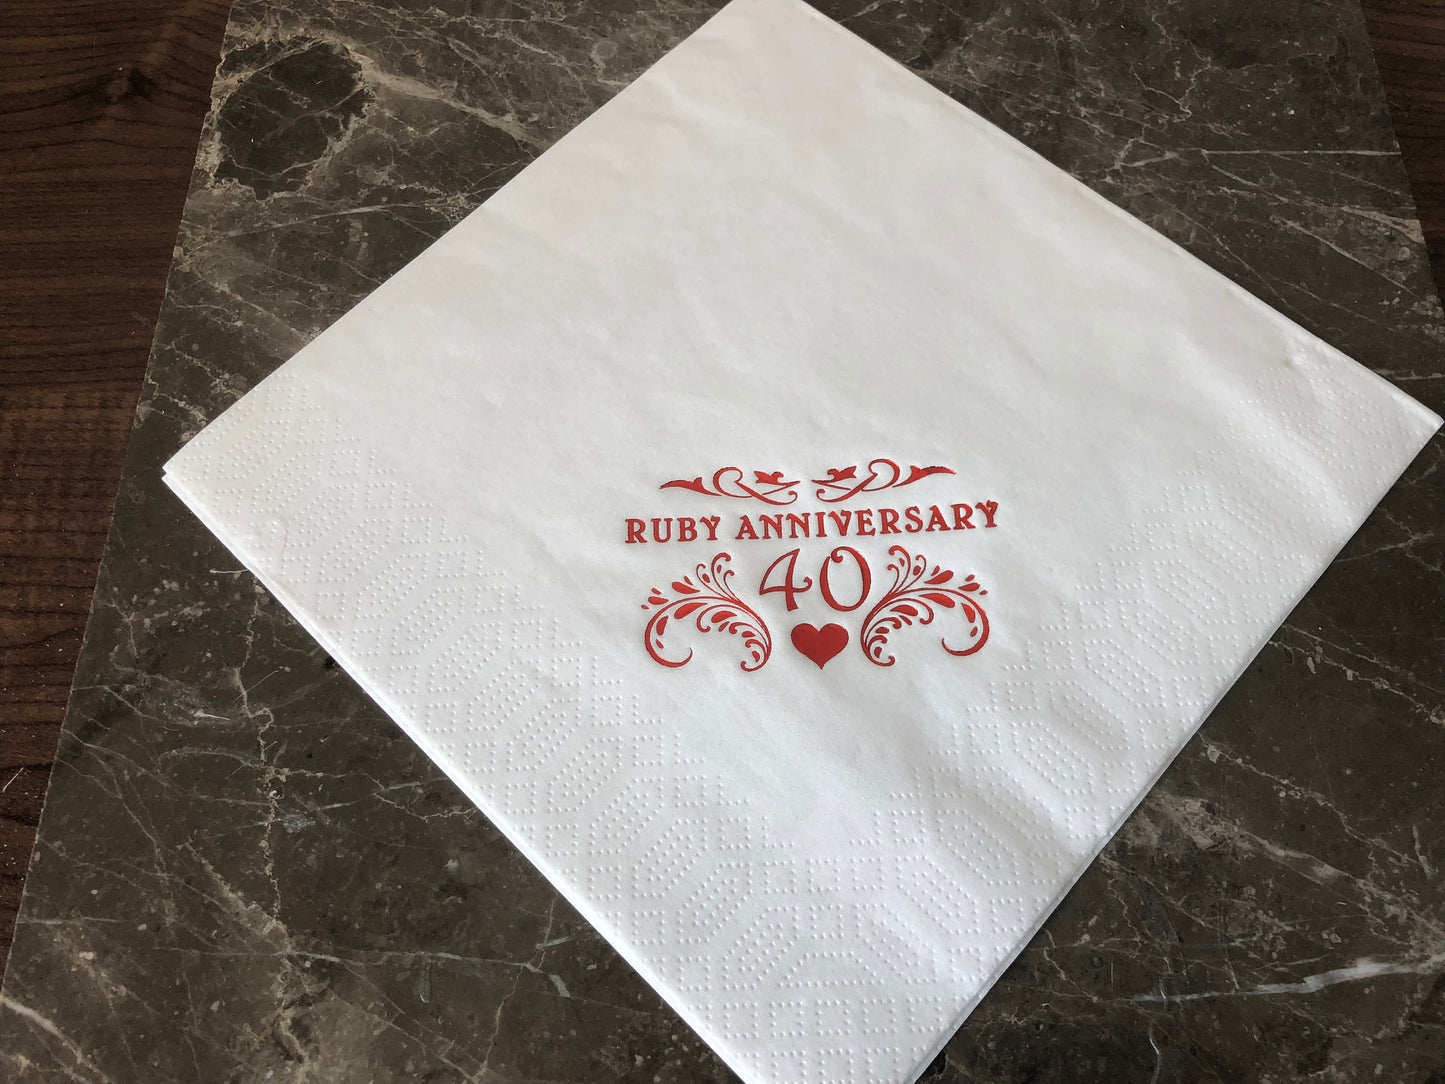 Ruby Wedding 40th Anniversary Napkins Serviettes 3ply luxury dinner napkins pack of 15